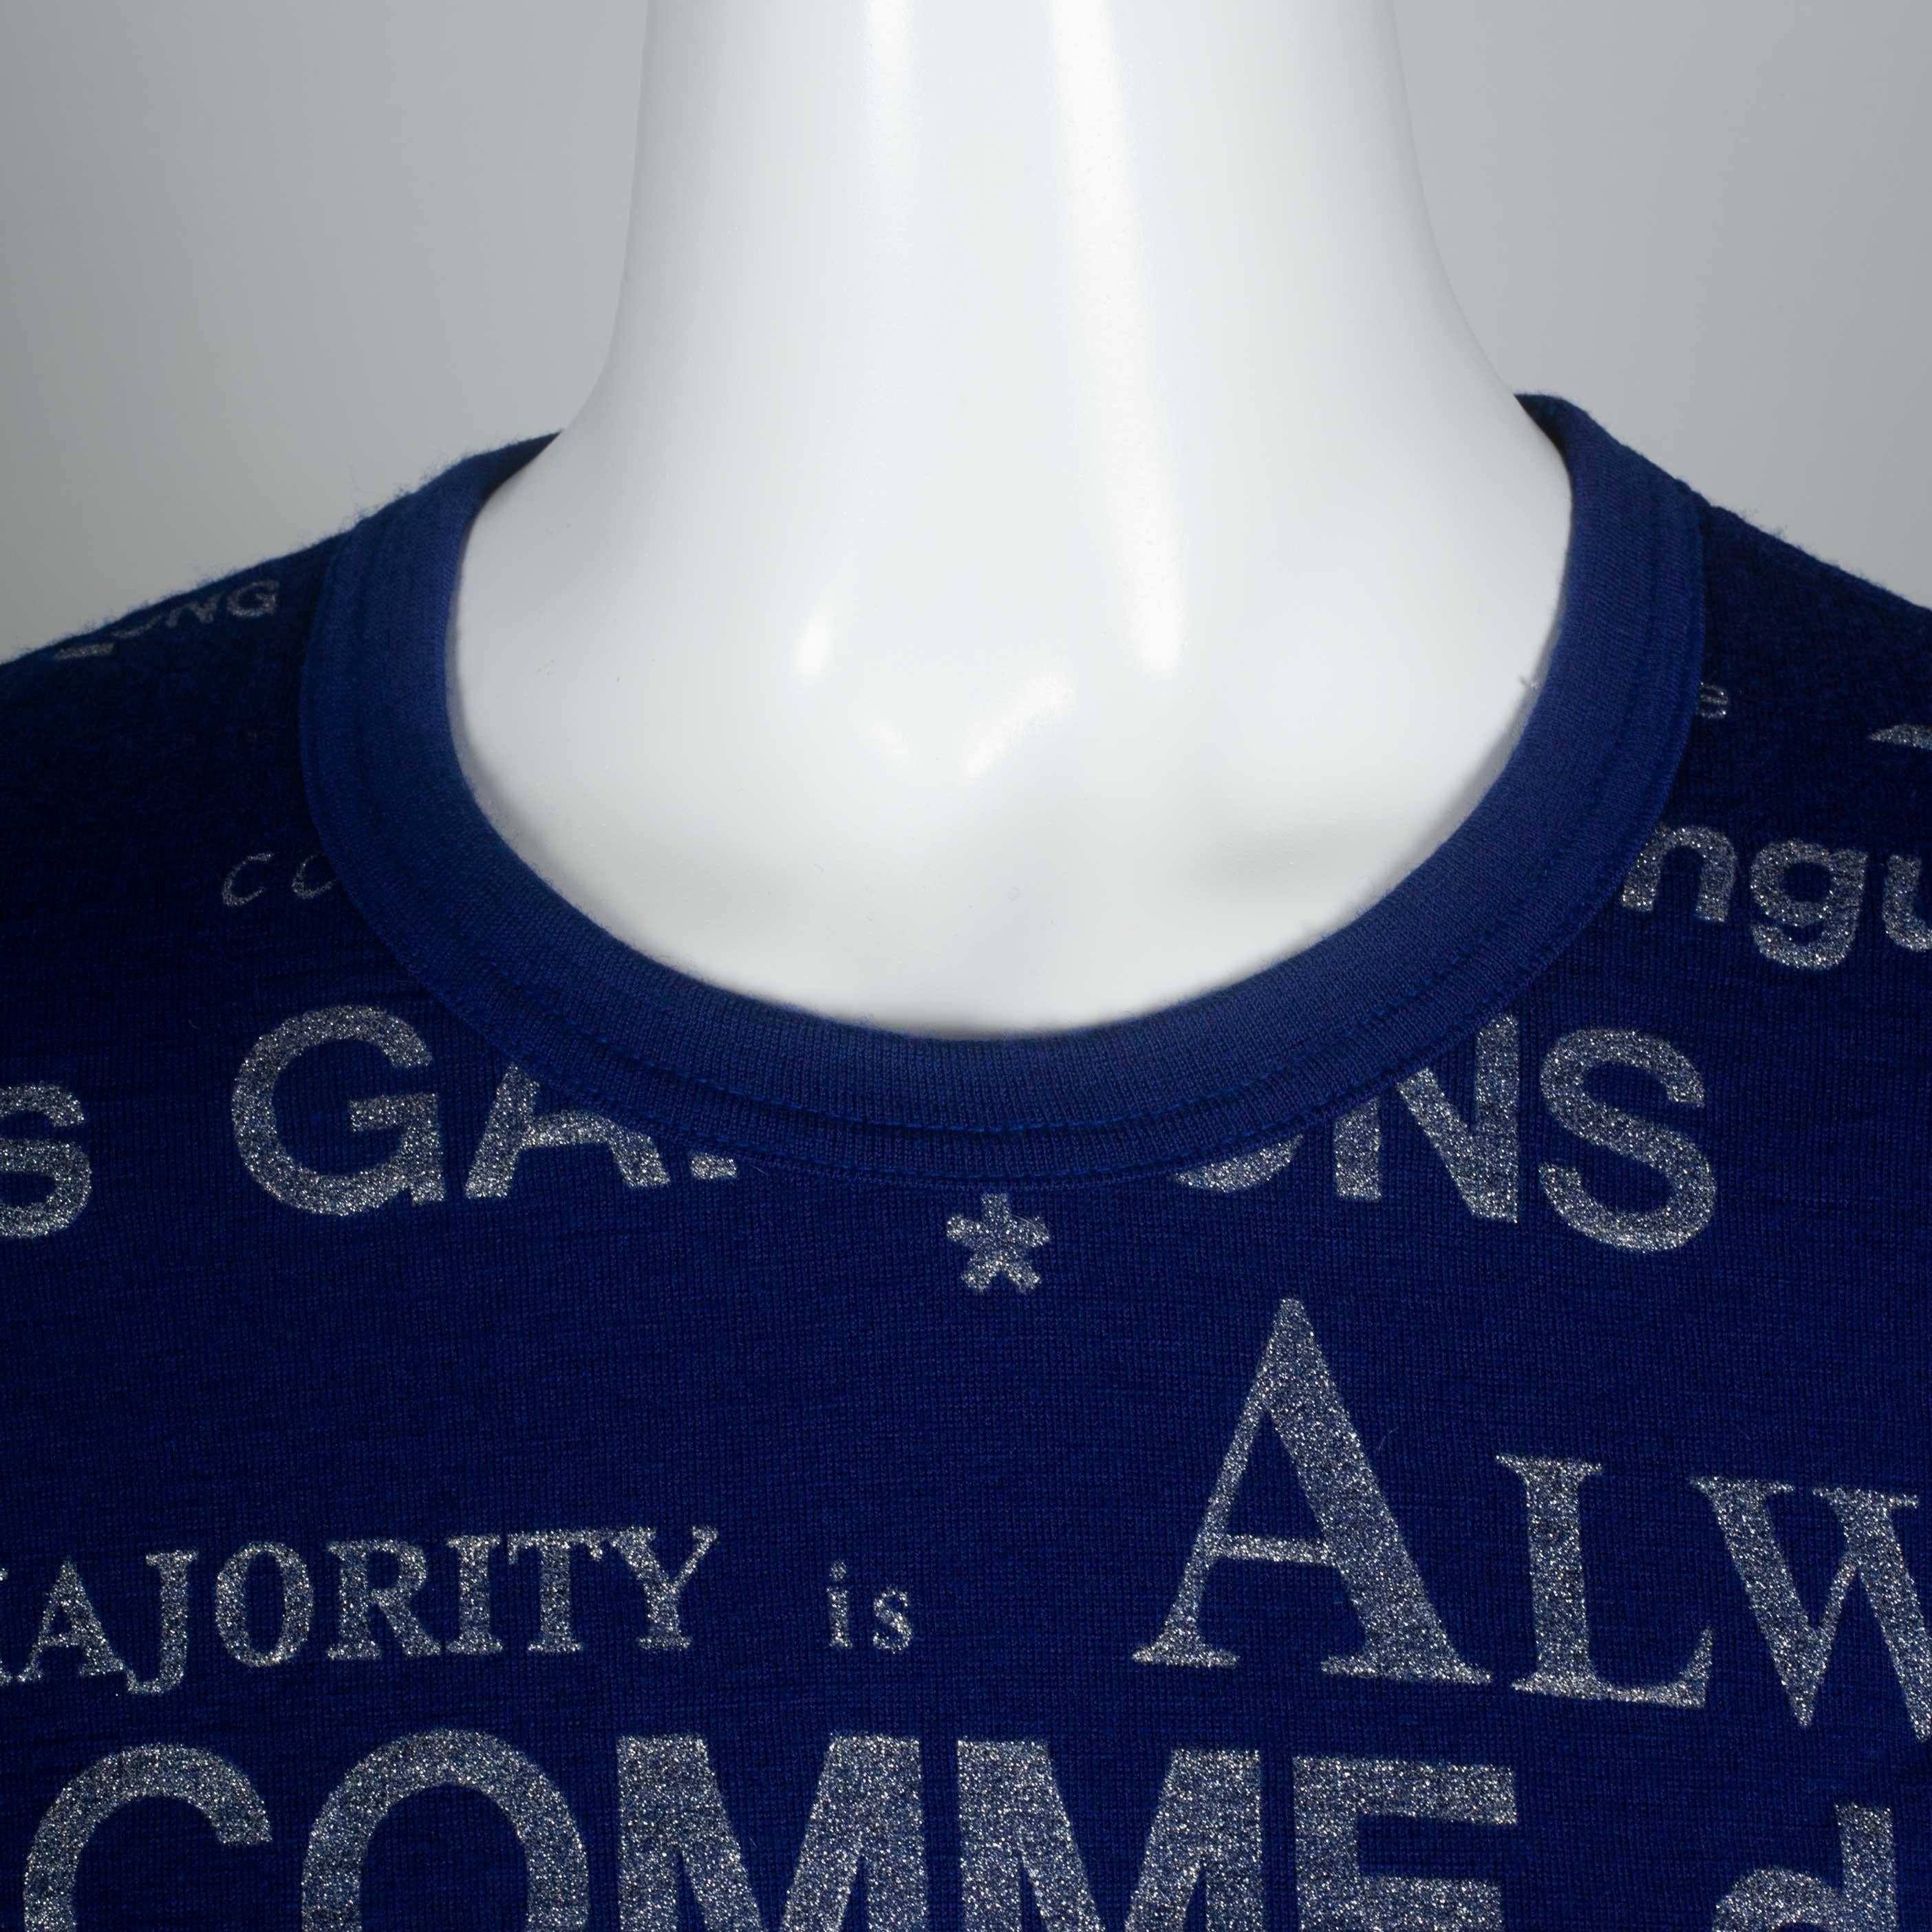 Comme des Garçons Blue Long Sleeve Shirt with Printed Words, 2003 5